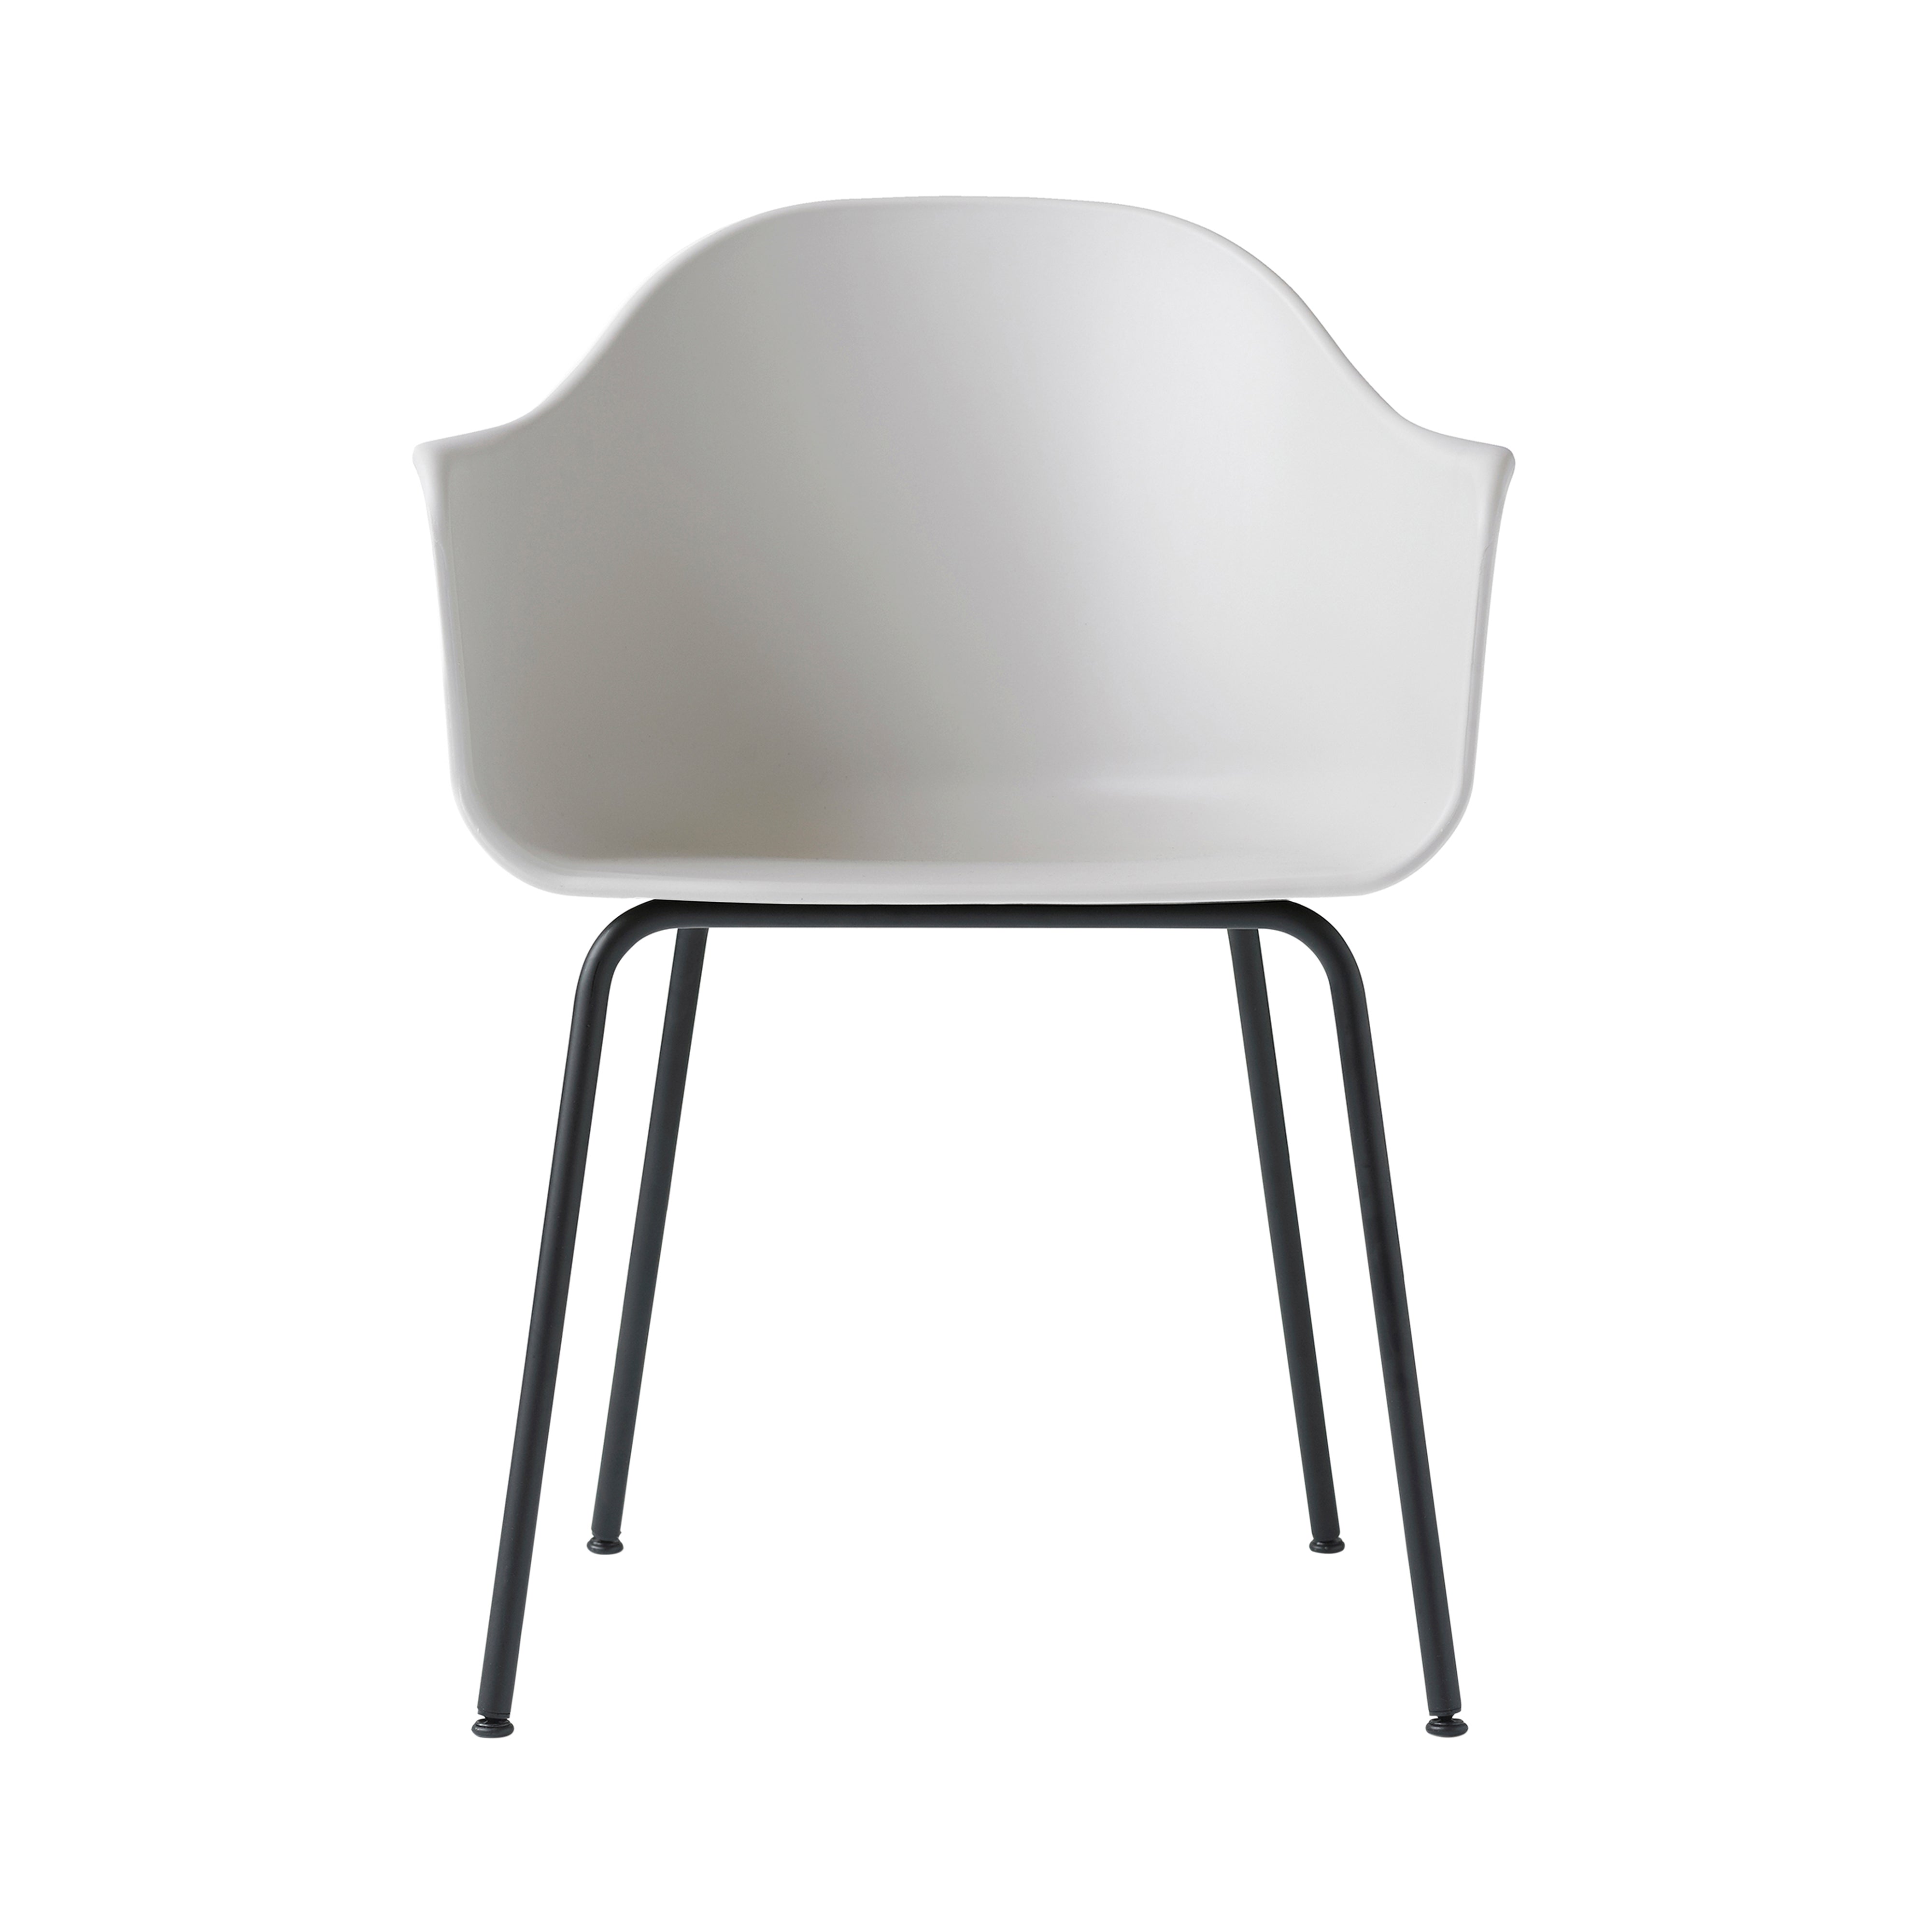 Harbour Dining Chair: Steel Base + Light Grey